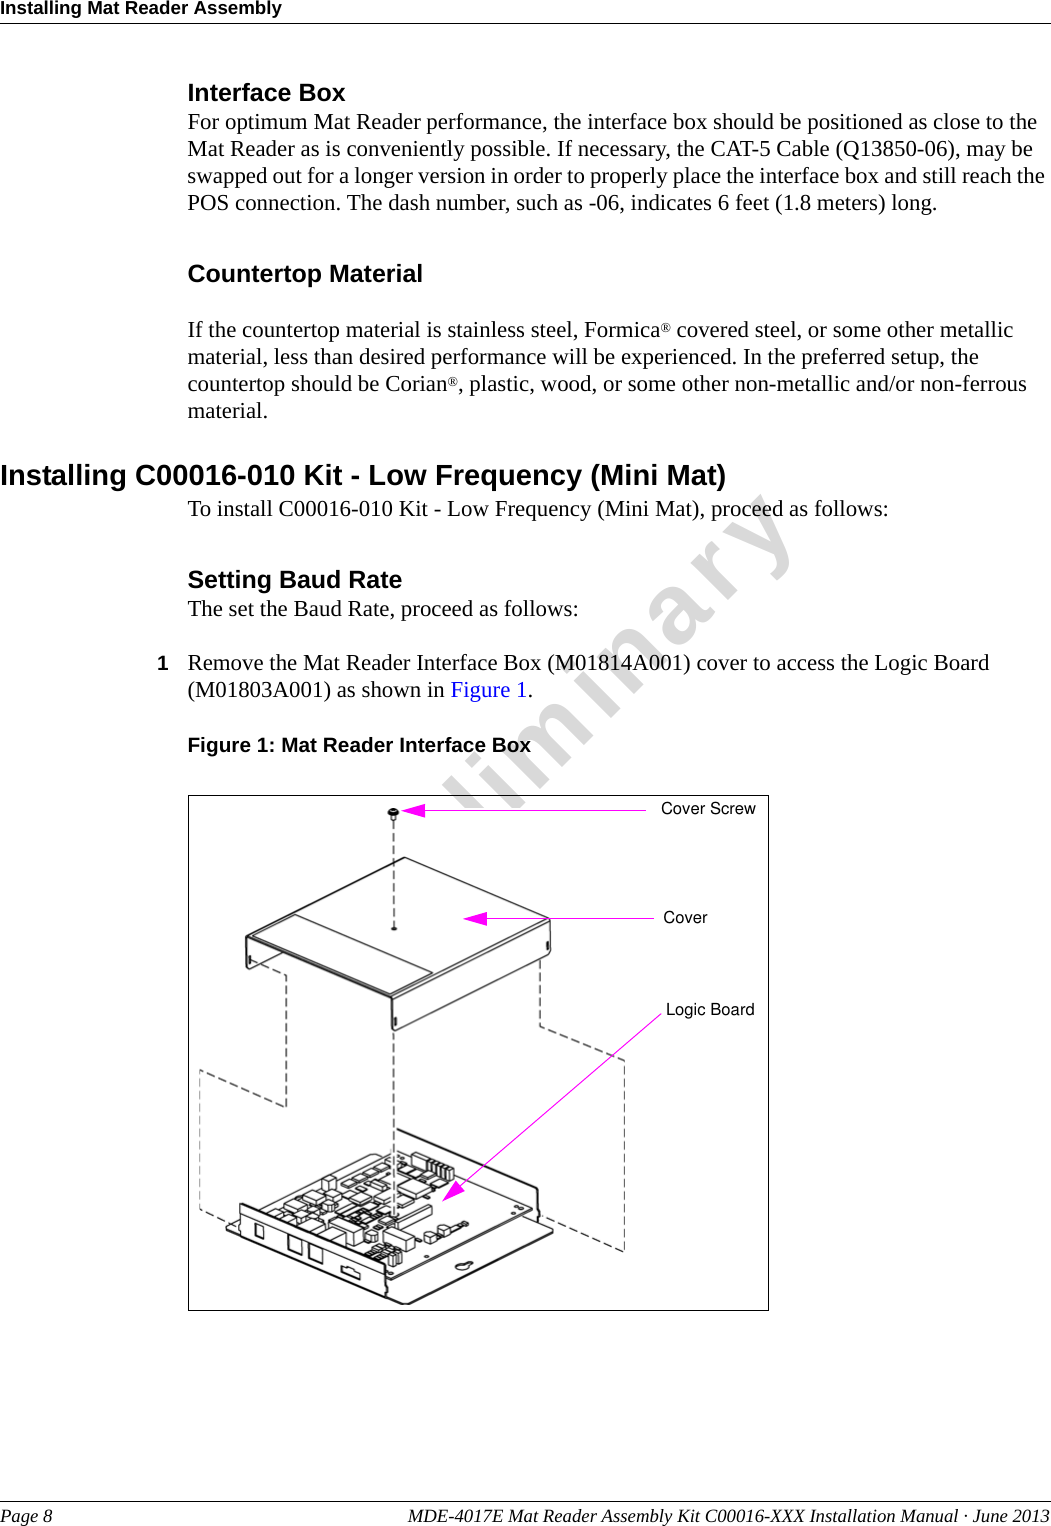 Installing Mat Reader AssemblyPage 8 MDE-4017E Mat Reader Assembly Kit C00016-XXX Installation Manual · June 2013PreliminaryInterface BoxFor optimum Mat Reader performance, the interface box should be positioned as close to the Mat Reader as is conveniently possible. If necessary, the CAT-5 Cable (Q13850-06), may be swapped out for a longer version in order to properly place the interface box and still reach the POS connection. The dash number, such as -06, indicates 6 feet (1.8 meters) long.Countertop MaterialIf the countertop material is stainless steel, Formica® covered steel, or some other metallic material, less than desired performance will be experienced. In the preferred setup, the countertop should be Corian®, plastic, wood, or some other non-metallic and/or non-ferrous material.Installing C00016-010 Kit - Low Frequency (Mini Mat)To install C00016-010 Kit - Low Frequency (Mini Mat), proceed as follows:Setting Baud RateThe set the Baud Rate, proceed as follows:1Remove the Mat Reader Interface Box (M01814A001) cover to access the Logic Board (M01803A001) as shown in Figure 1.Figure 1: Mat Reader Interface BoxCover ScrewCoverLogic Board